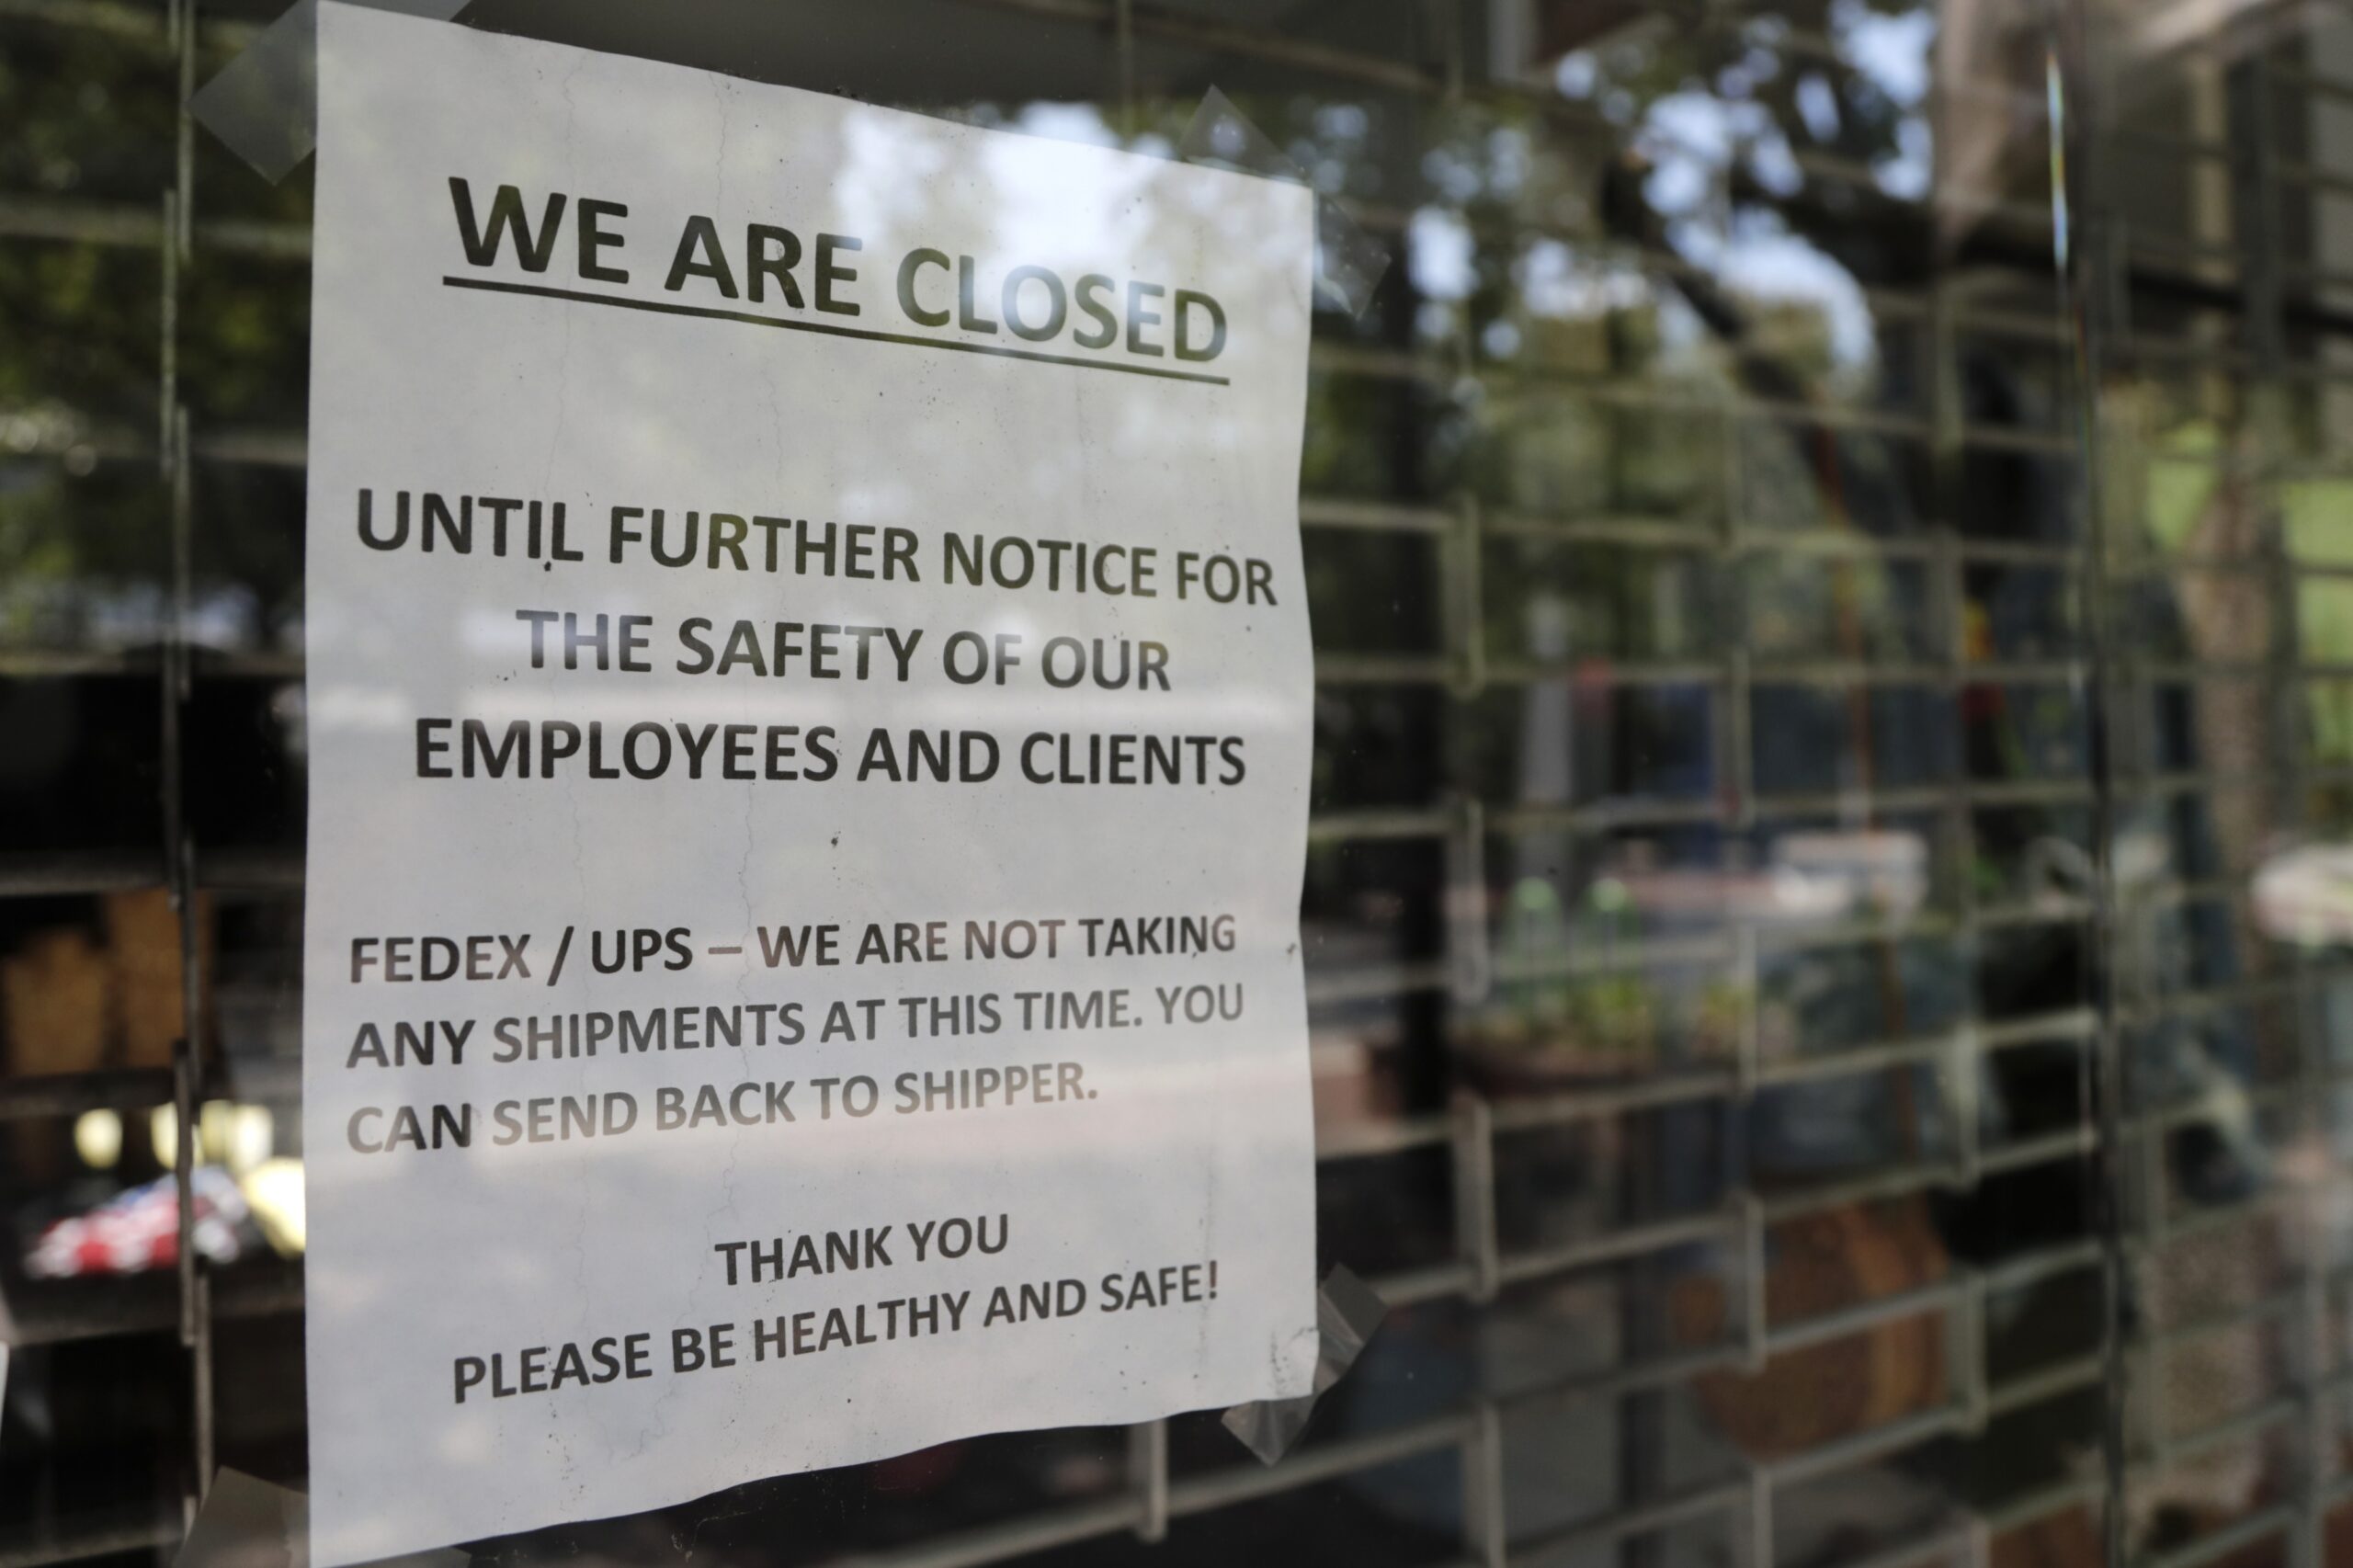 "Closed" sign posted on business door